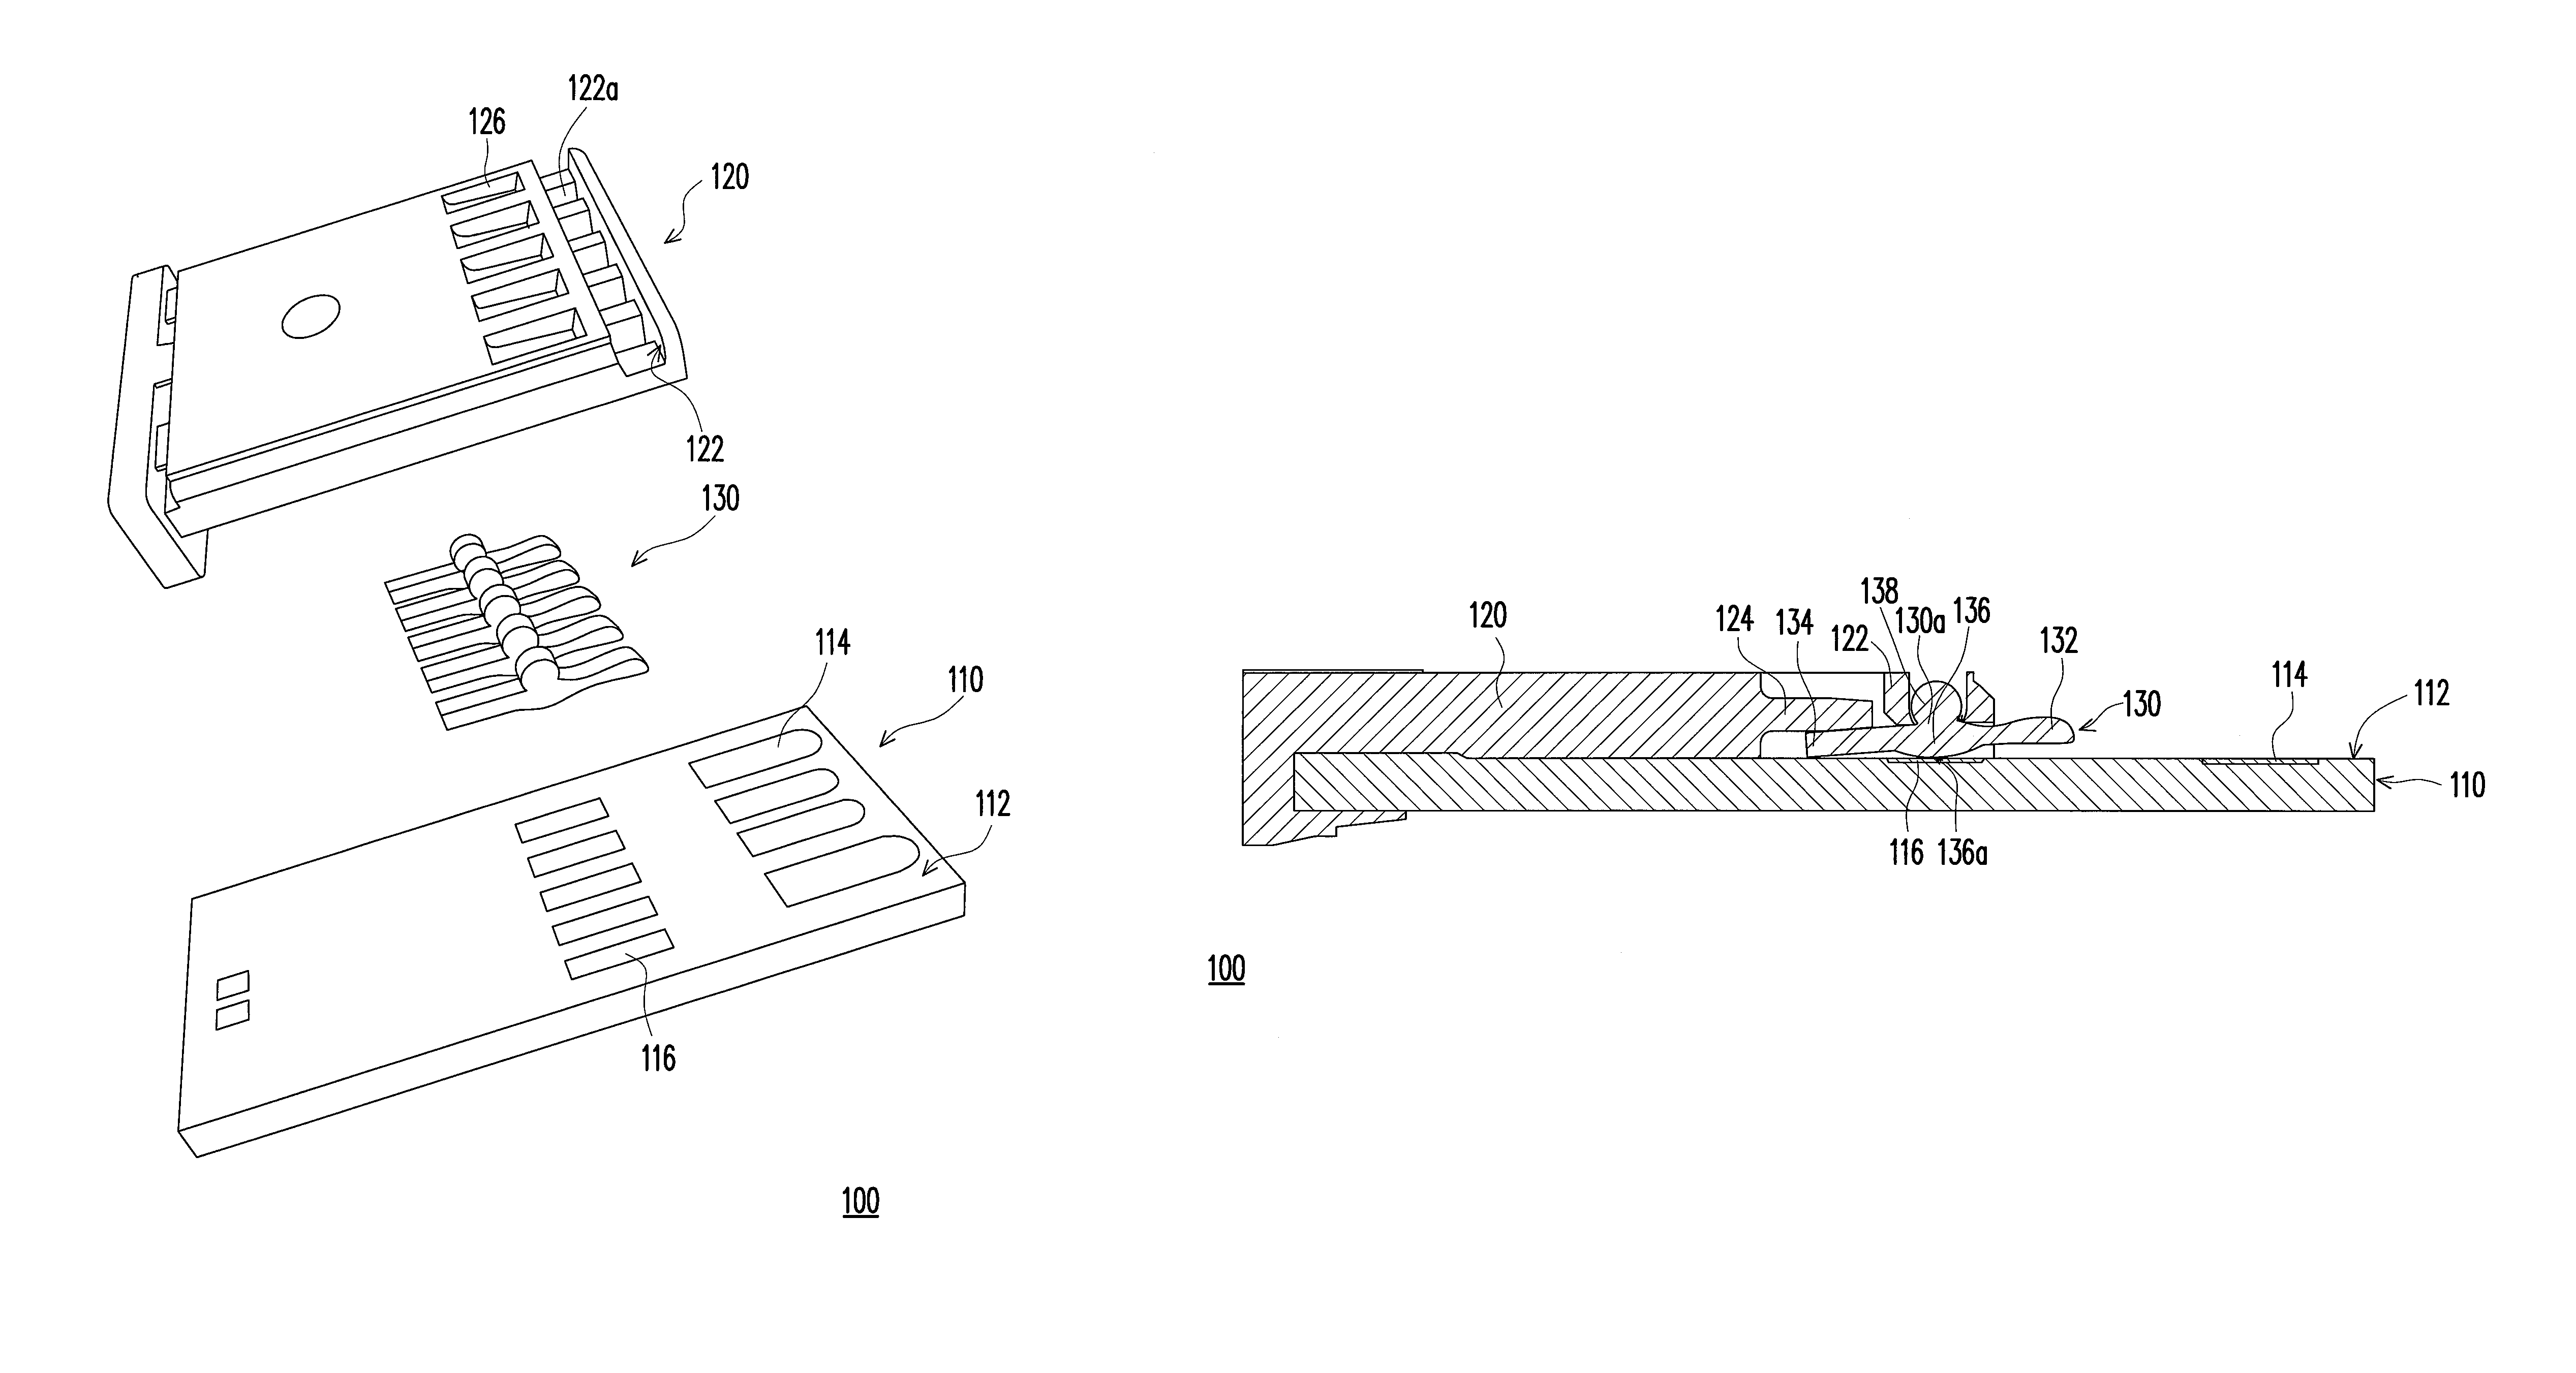 Conductive terminal with a central bulged portion configured for swinging relative to a base material